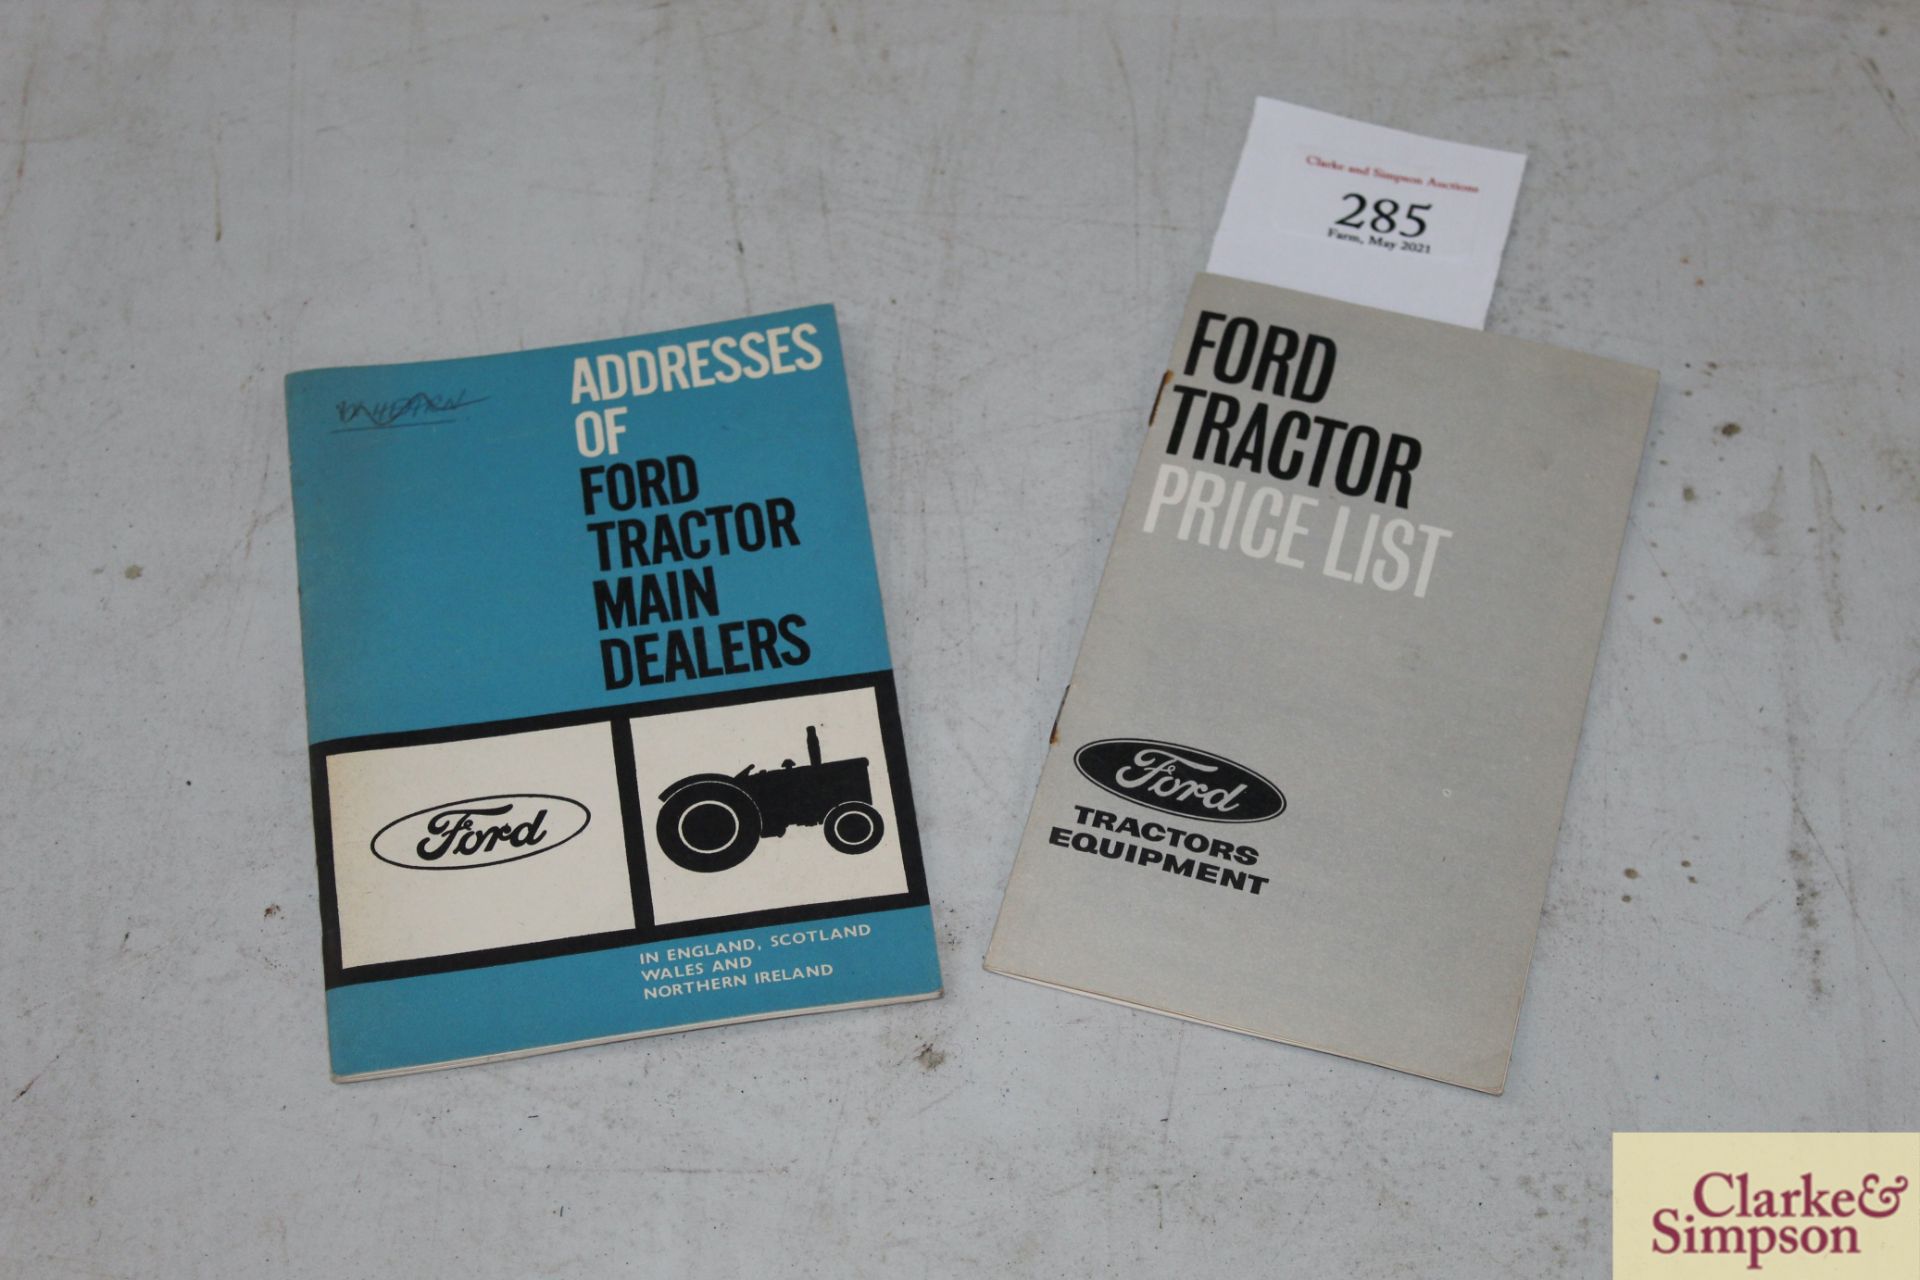 Ford Tractor Price List, 29th April 1966 and Addre